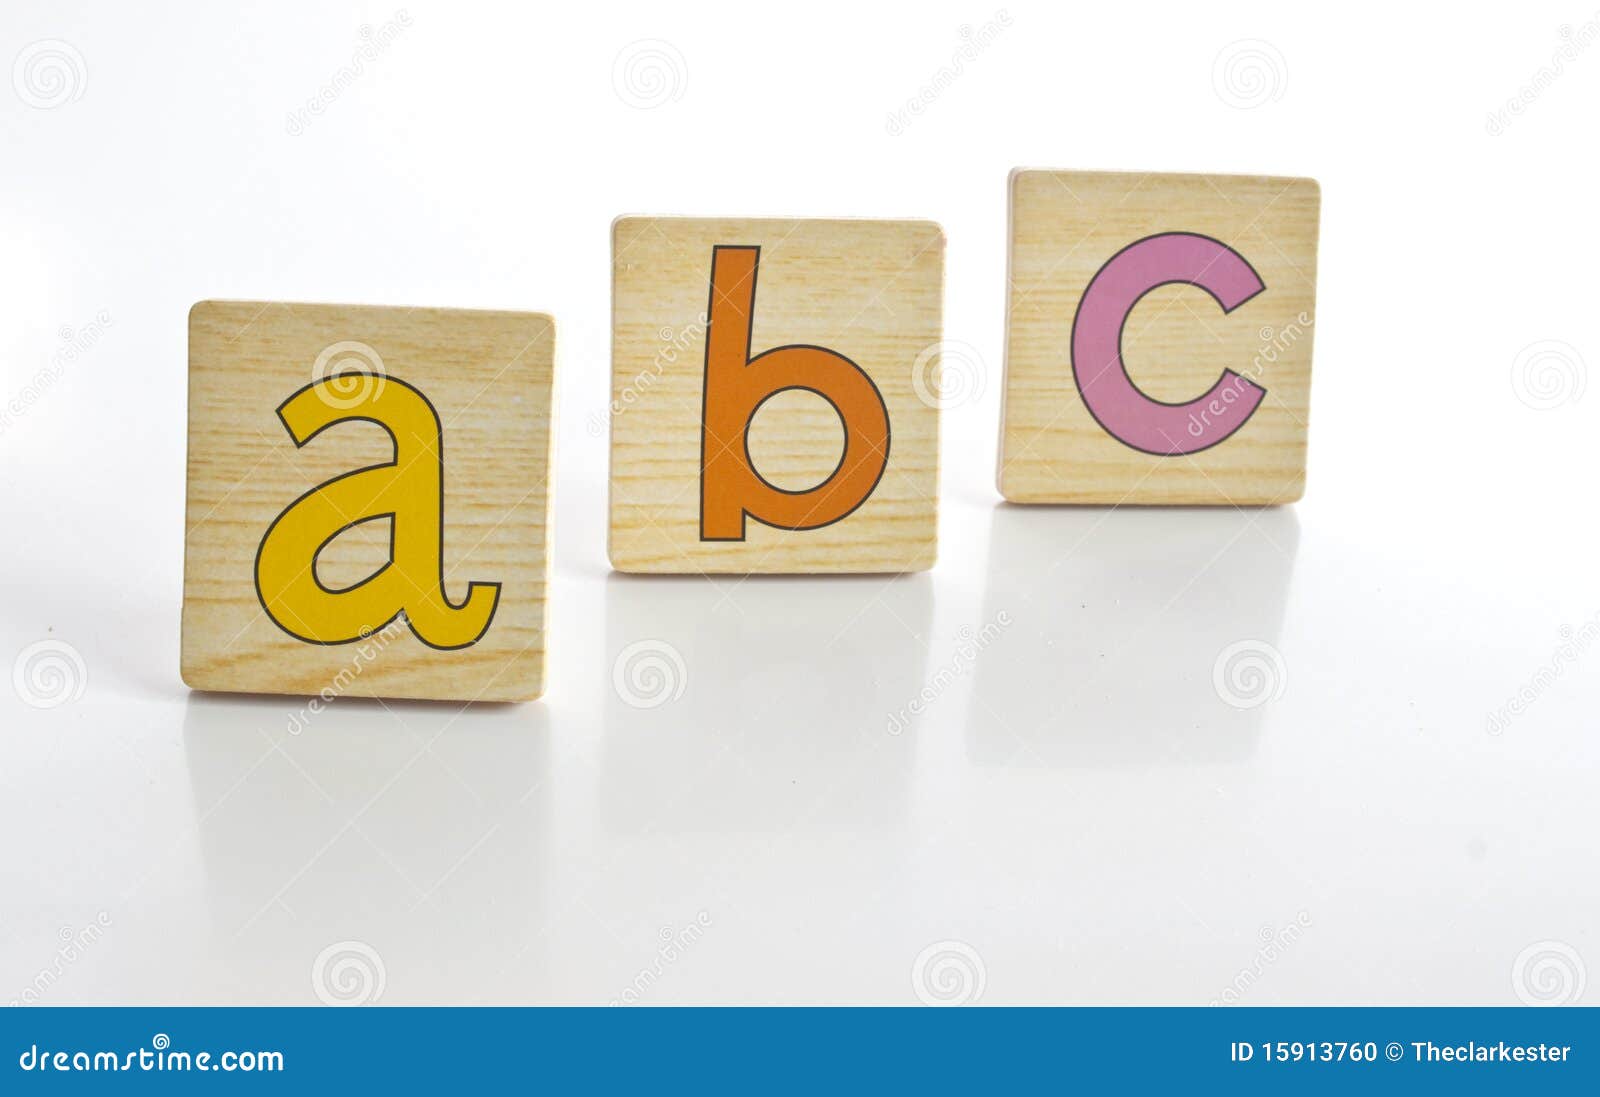 As simple as A B C. Wooden tiles with the letters A B C